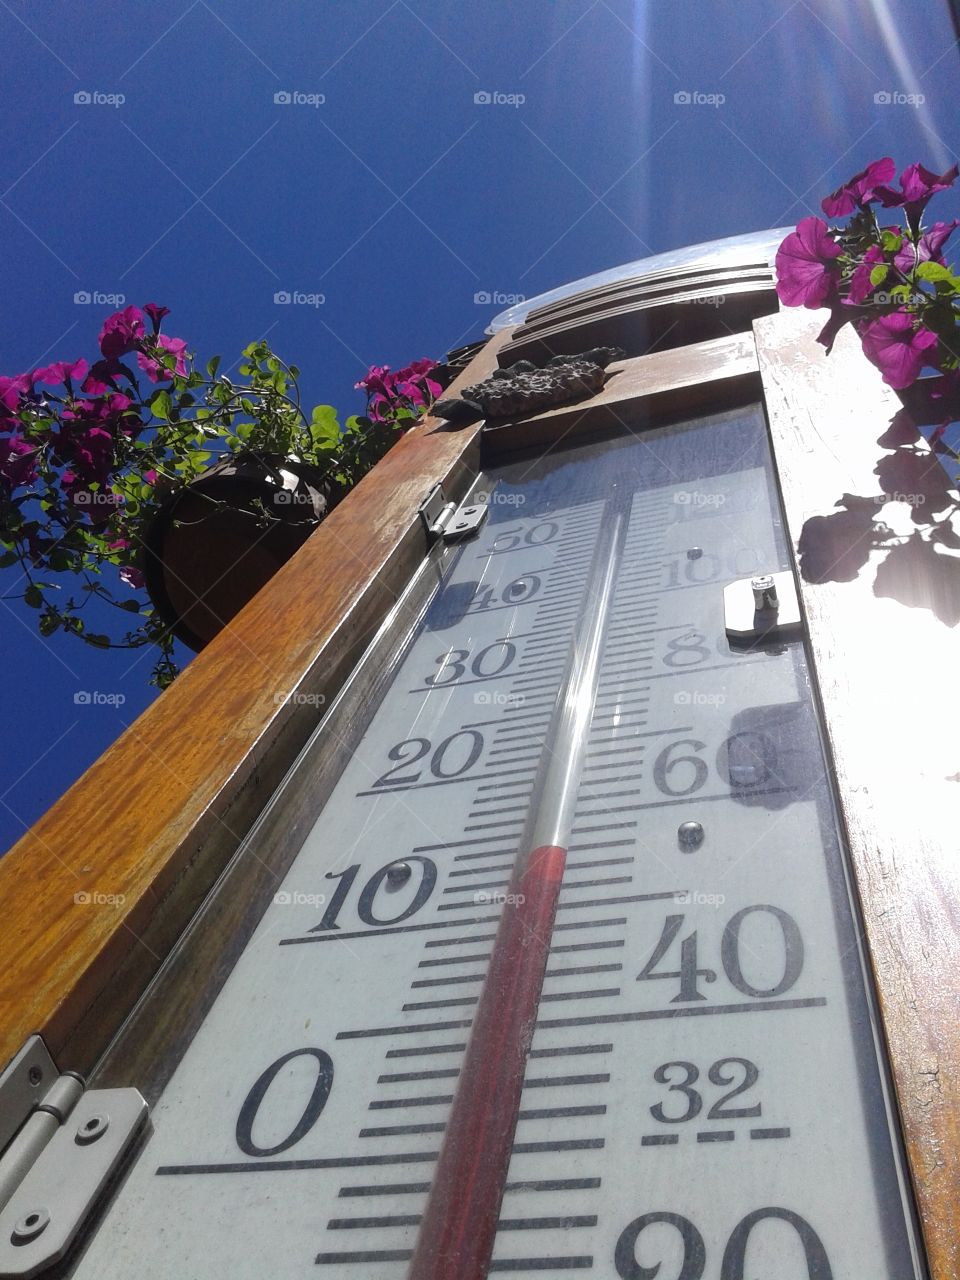 Low angle view of thermometer